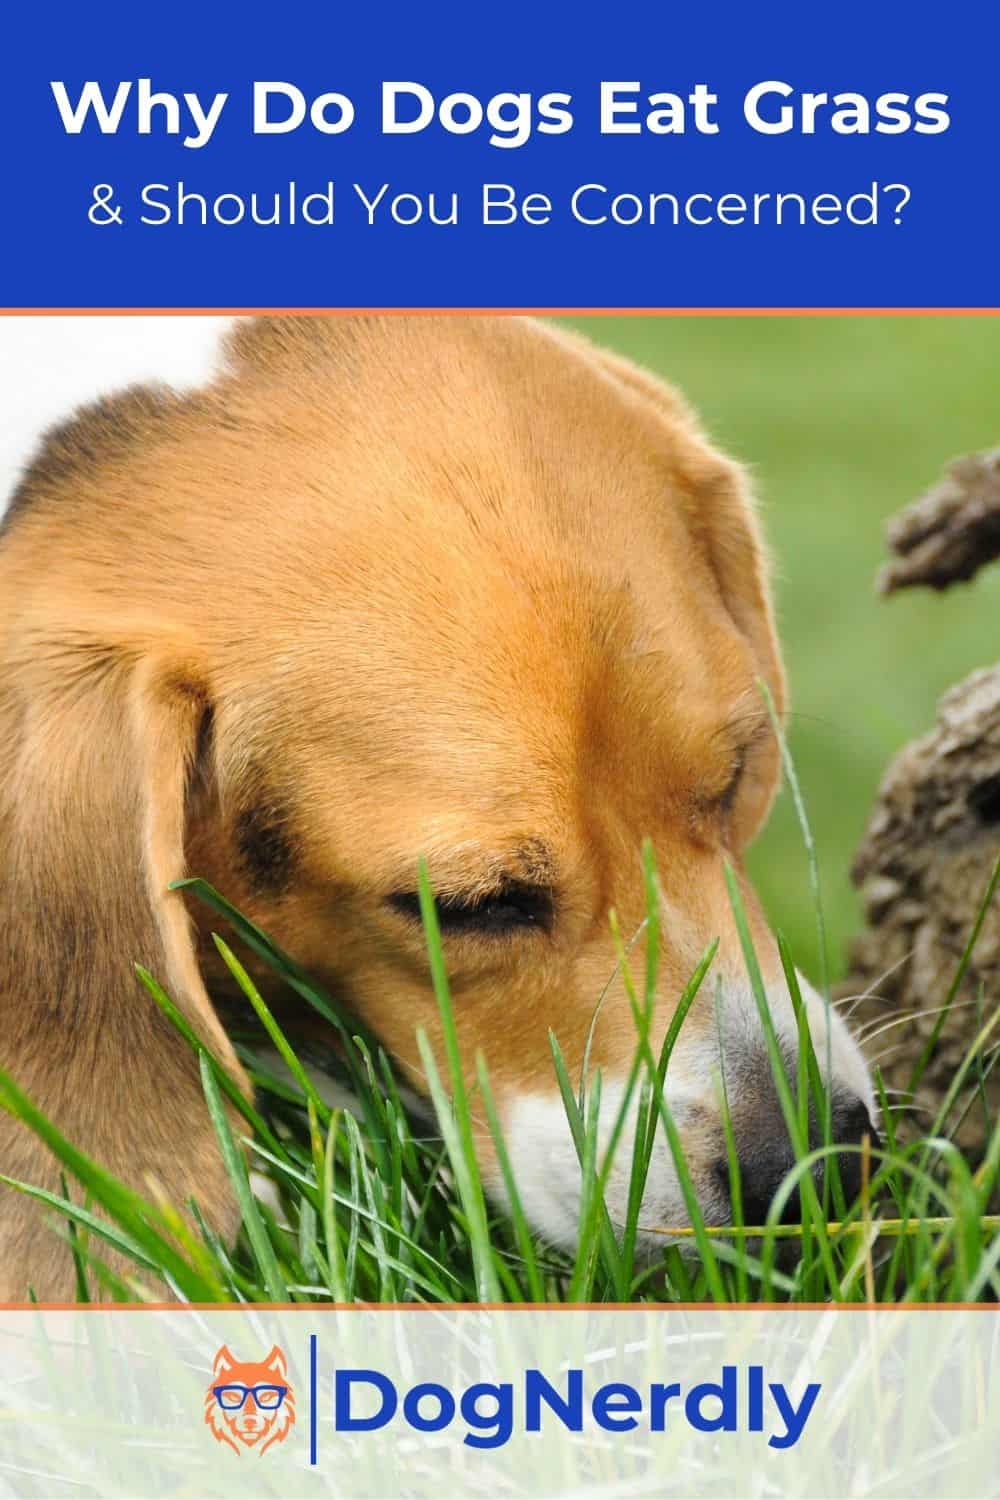 Why Do Dogs Eat Grass and Should You Be Concerned?